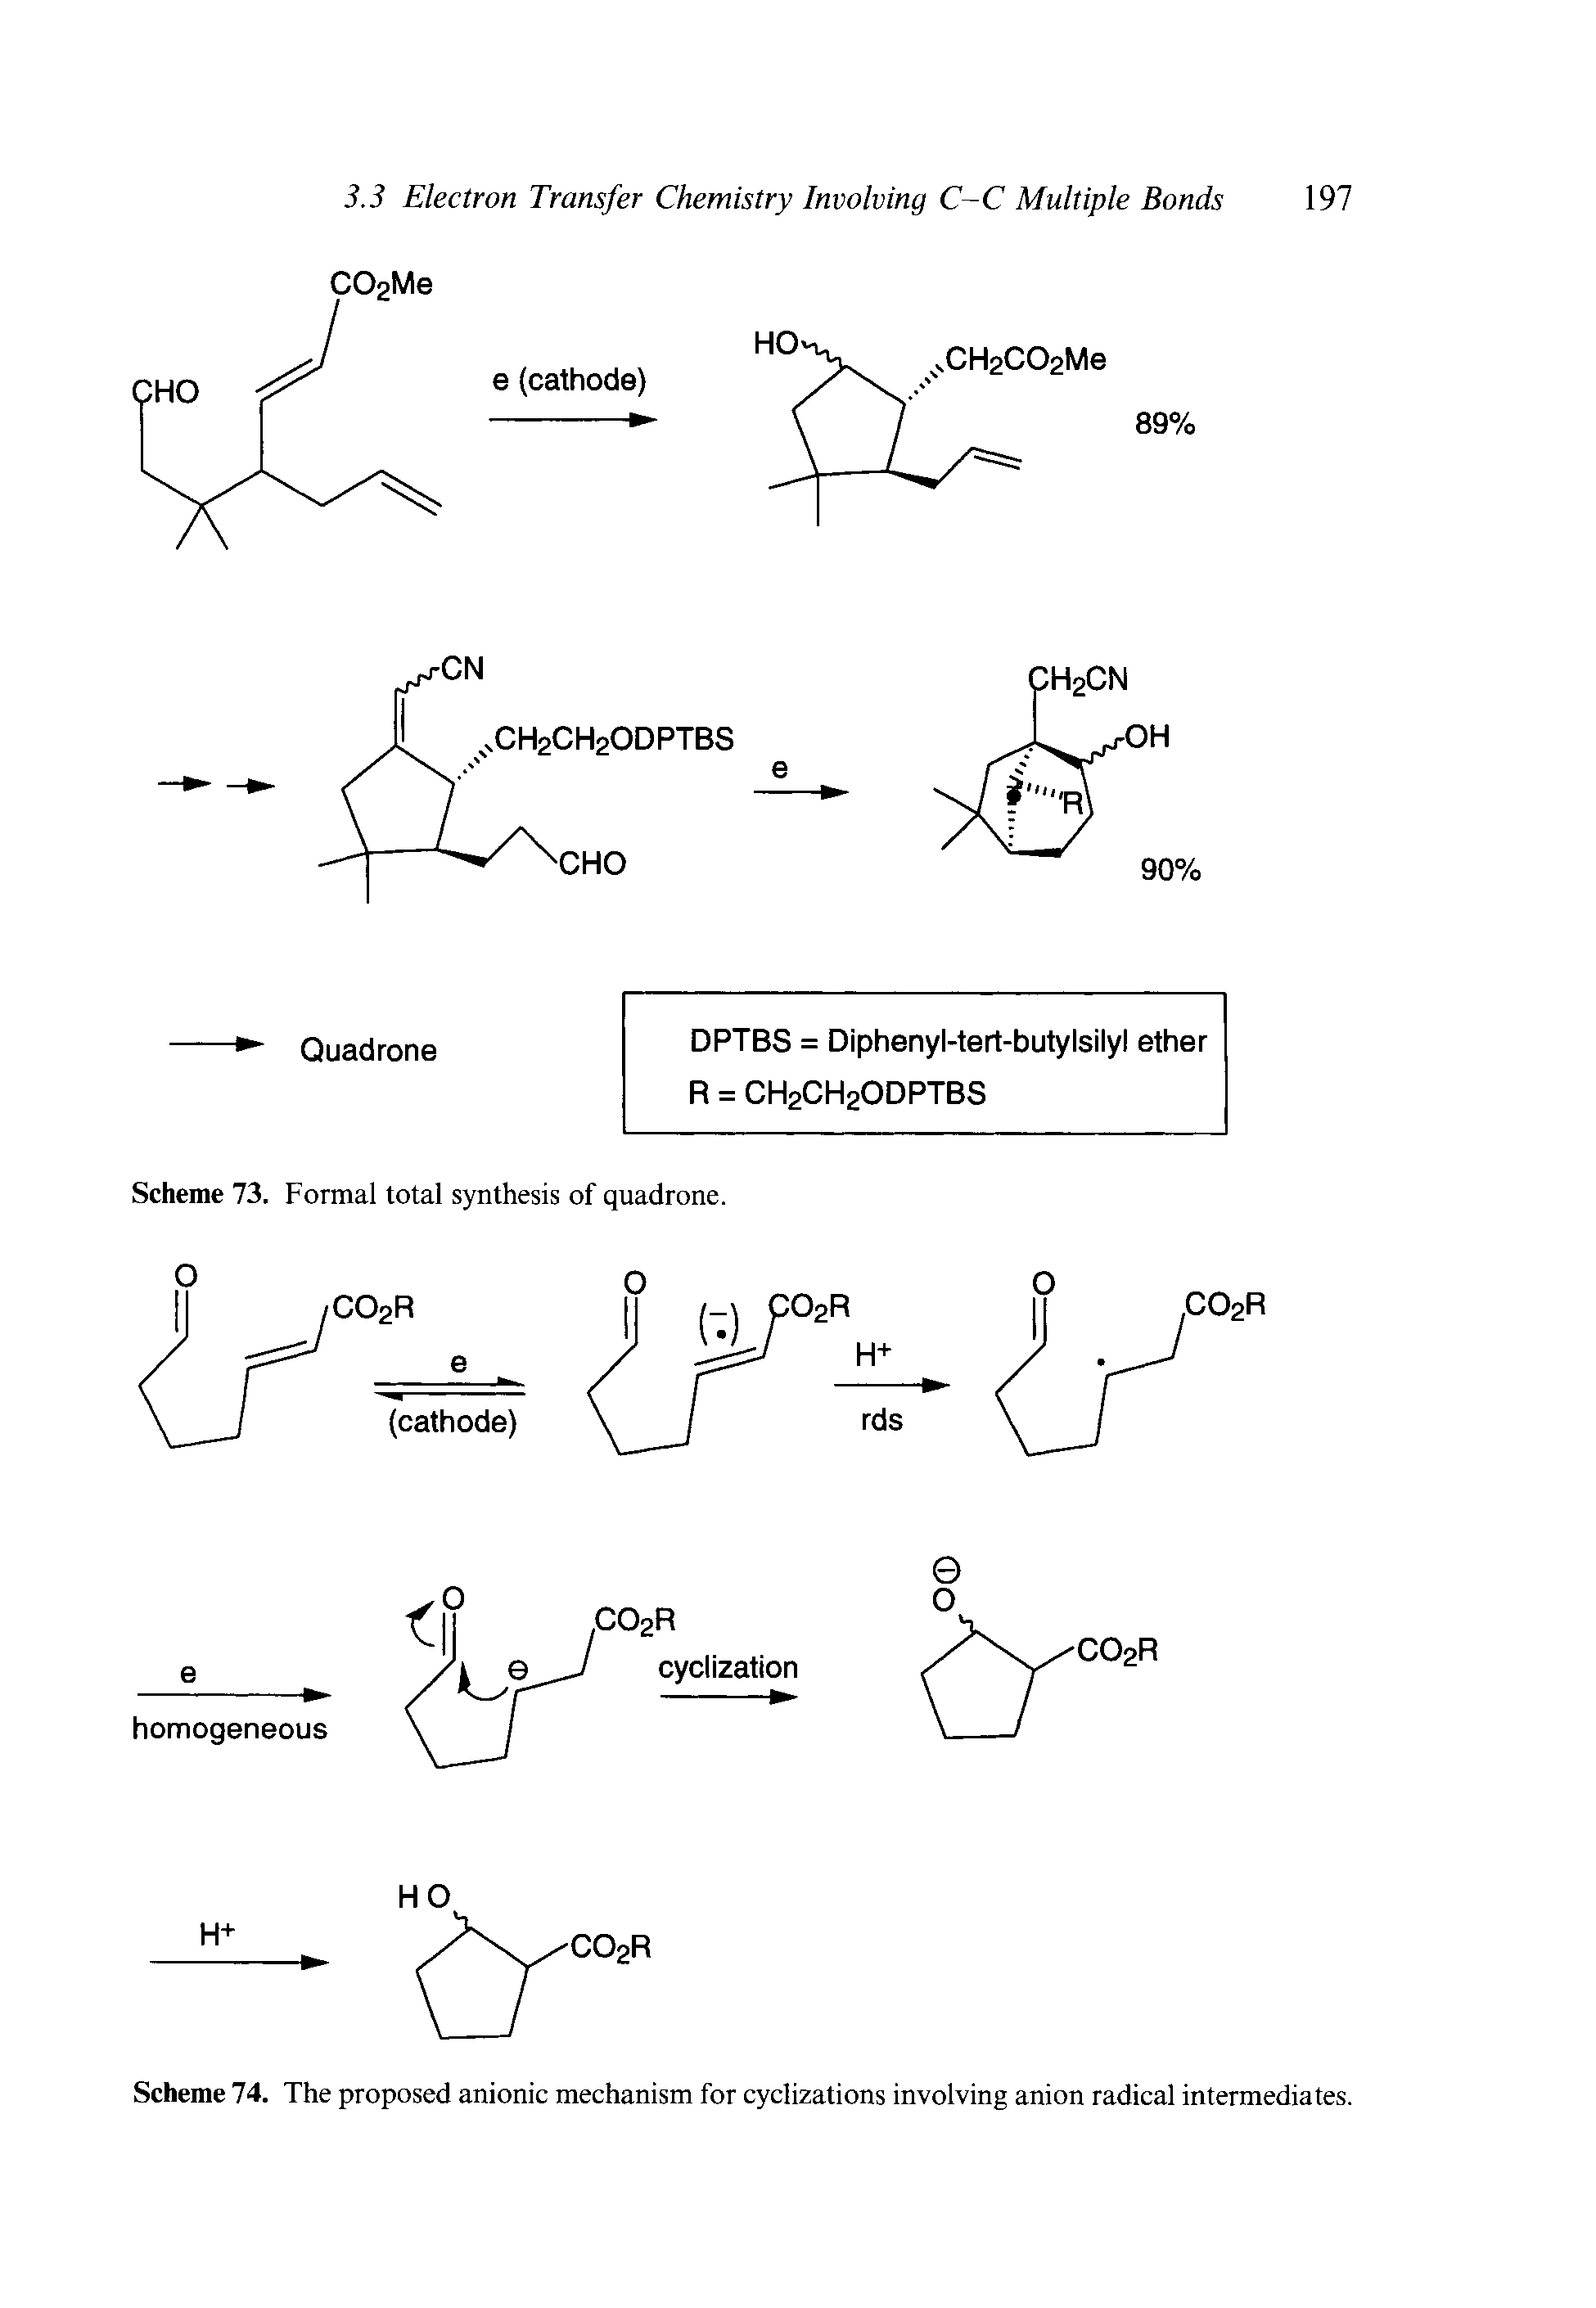 Scheme 74. The proposed anionic mechanism for cyclizations involving anion radical intermediates.